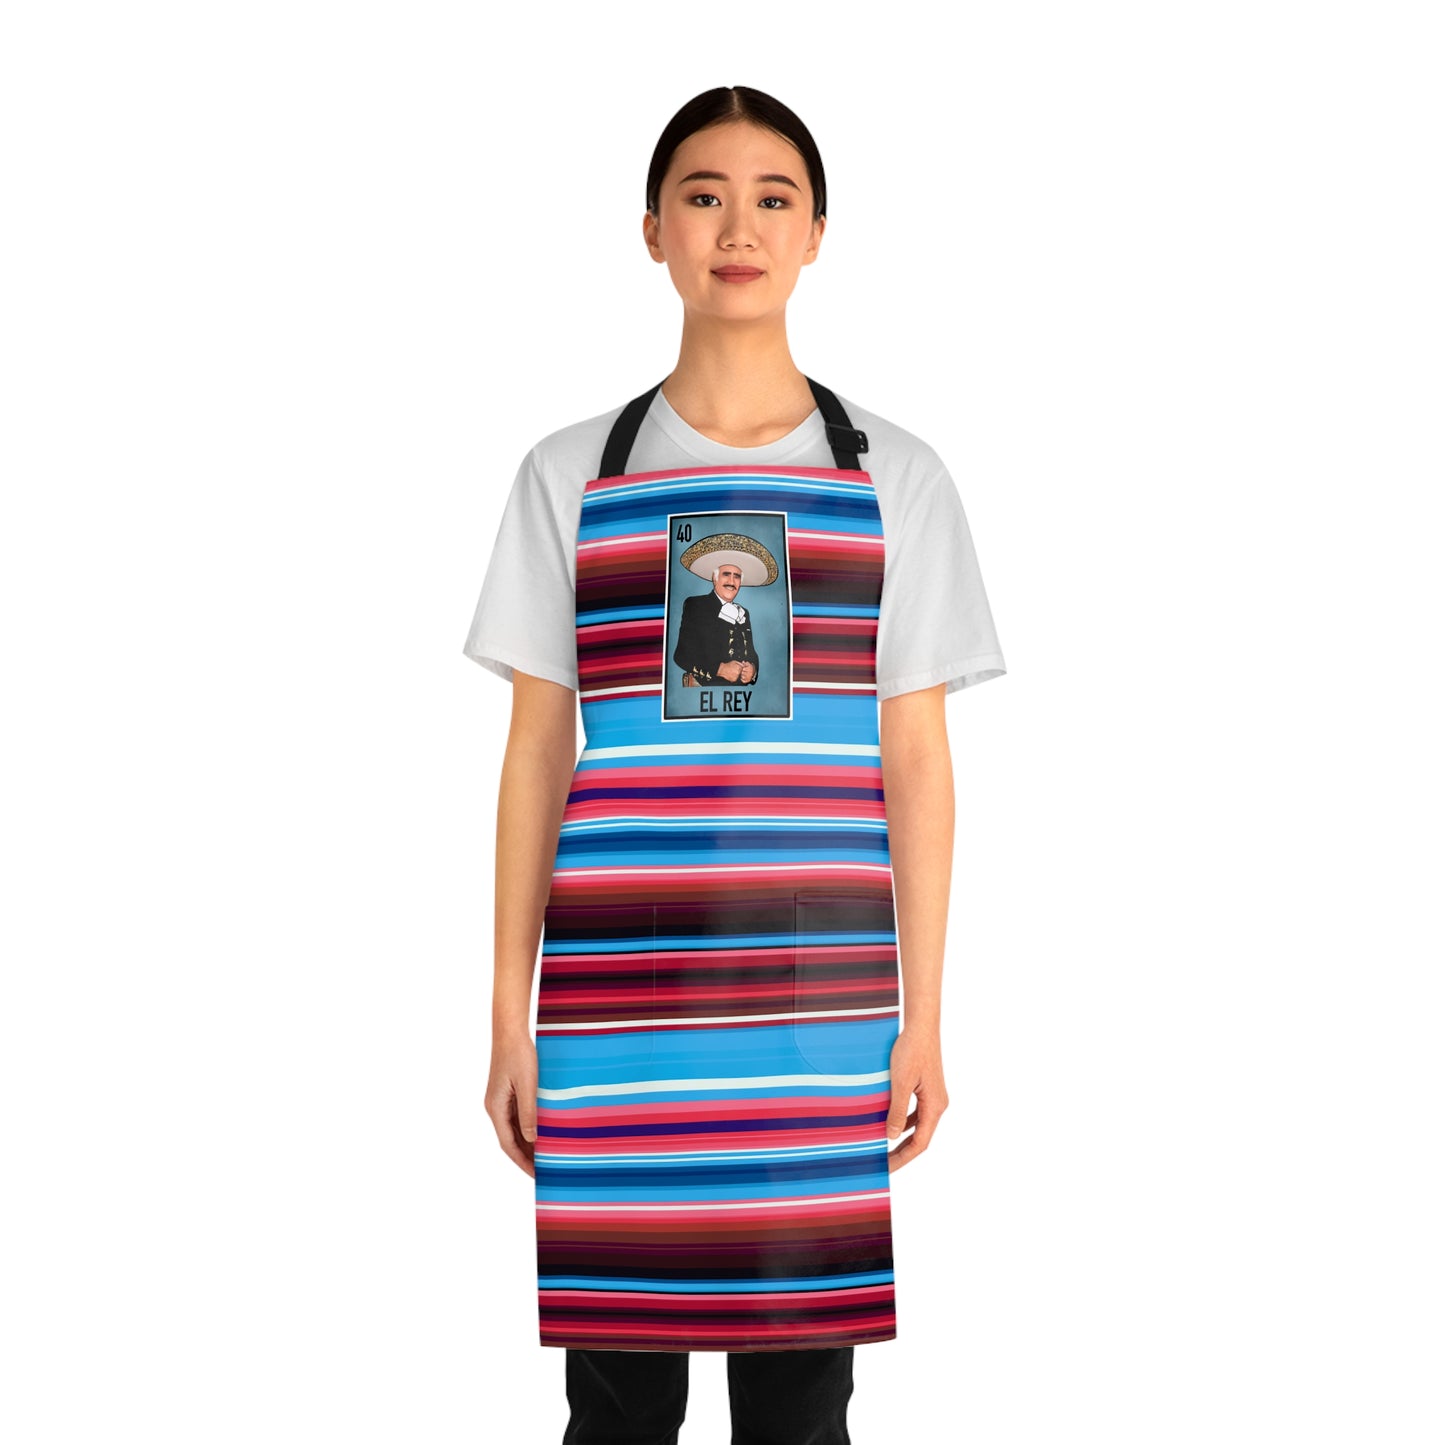 El rey delantal. Mexican Apron for Mexican husband. Birthdays gift for MexicanDad. Father’s Day gift for Mexican.